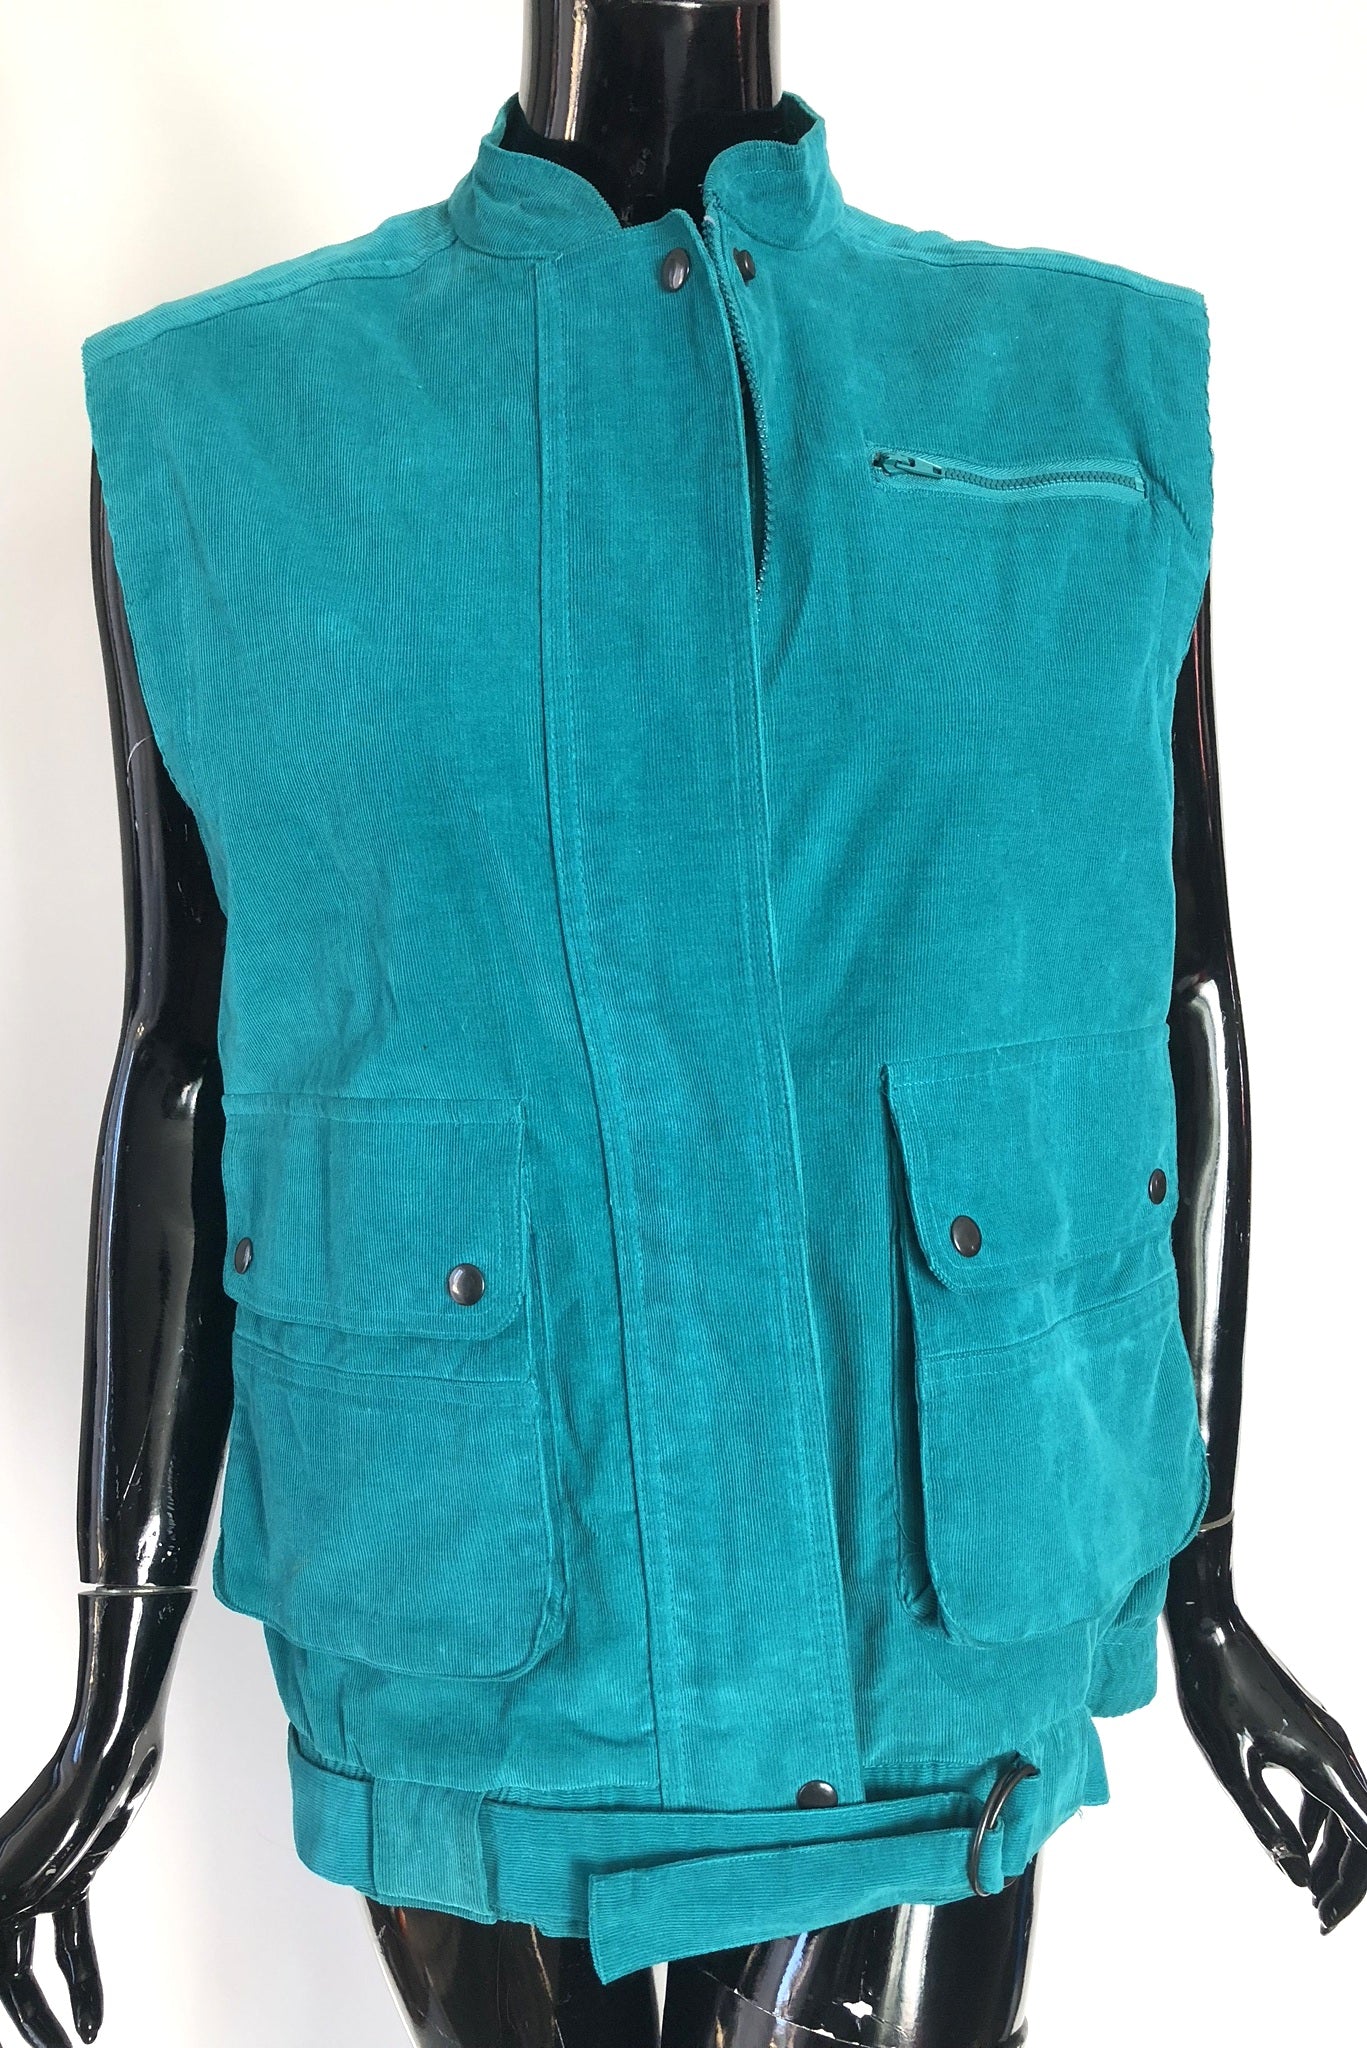 Cord and Carry Cargo Vest 2 colors